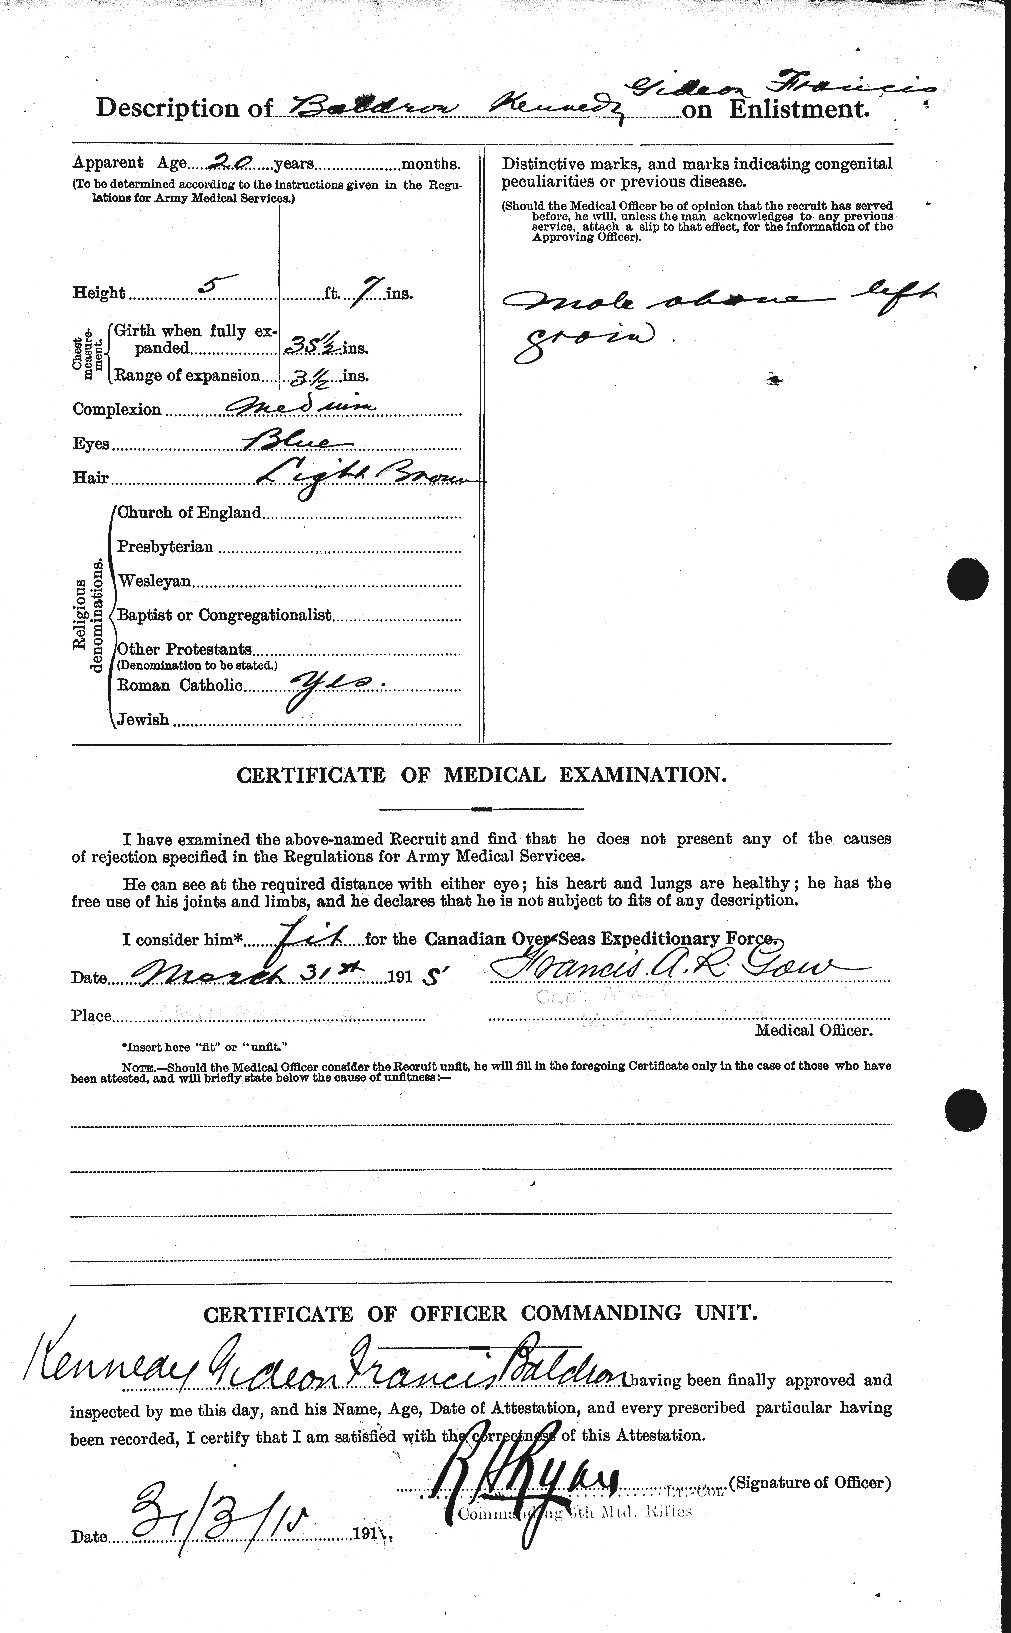 Personnel Records of the First World War - CEF 225201b